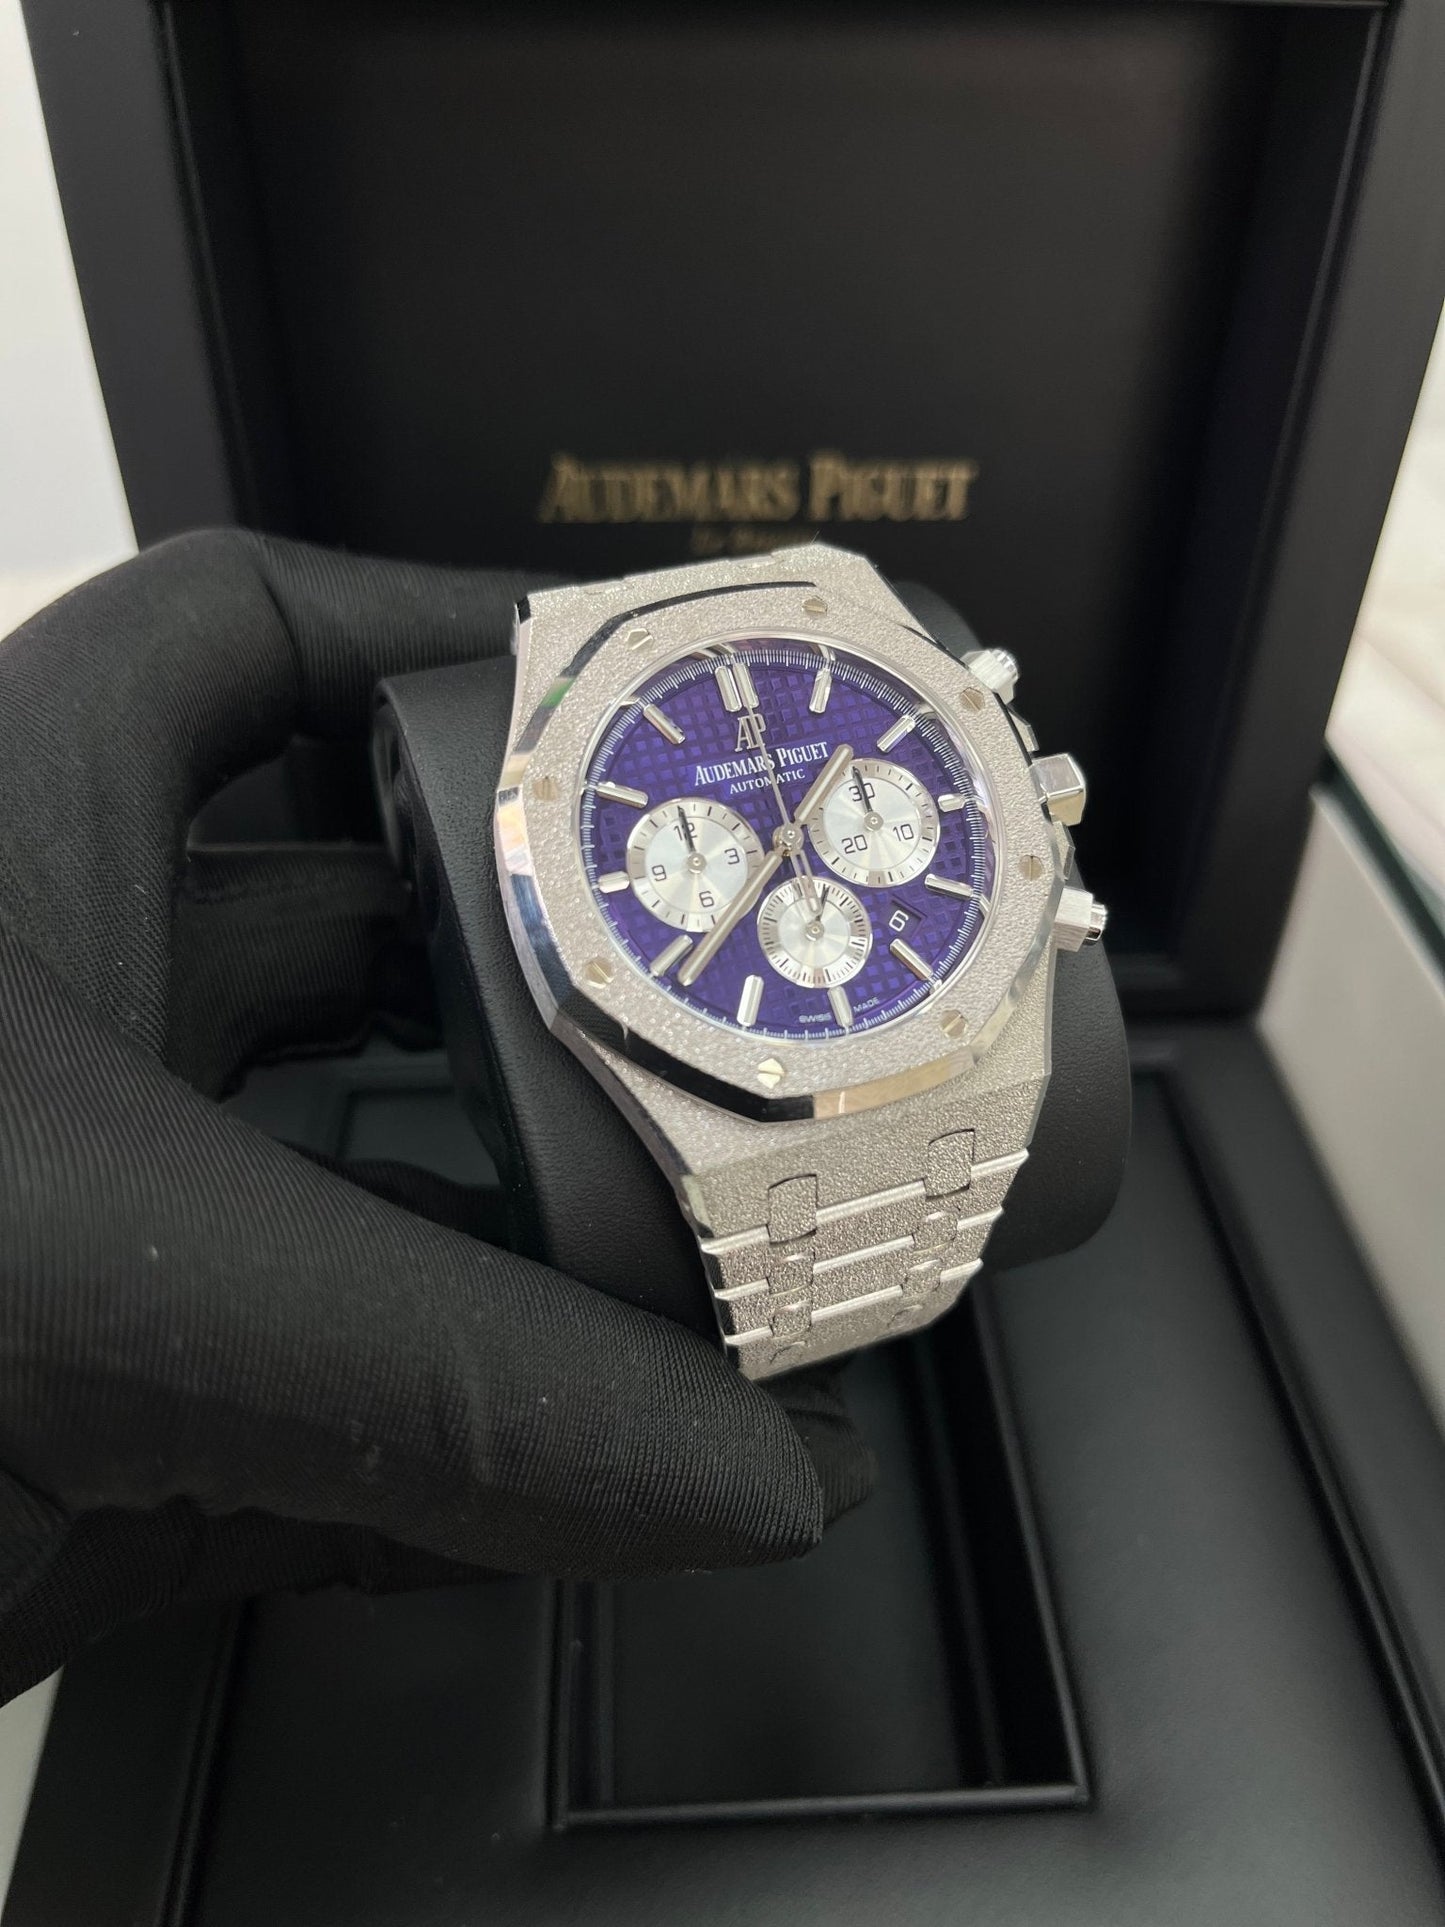 Audemars Piguet Royal Oak Selfwinding Chronograph Frosted White Gold Purple Dial LIMITED EDITION